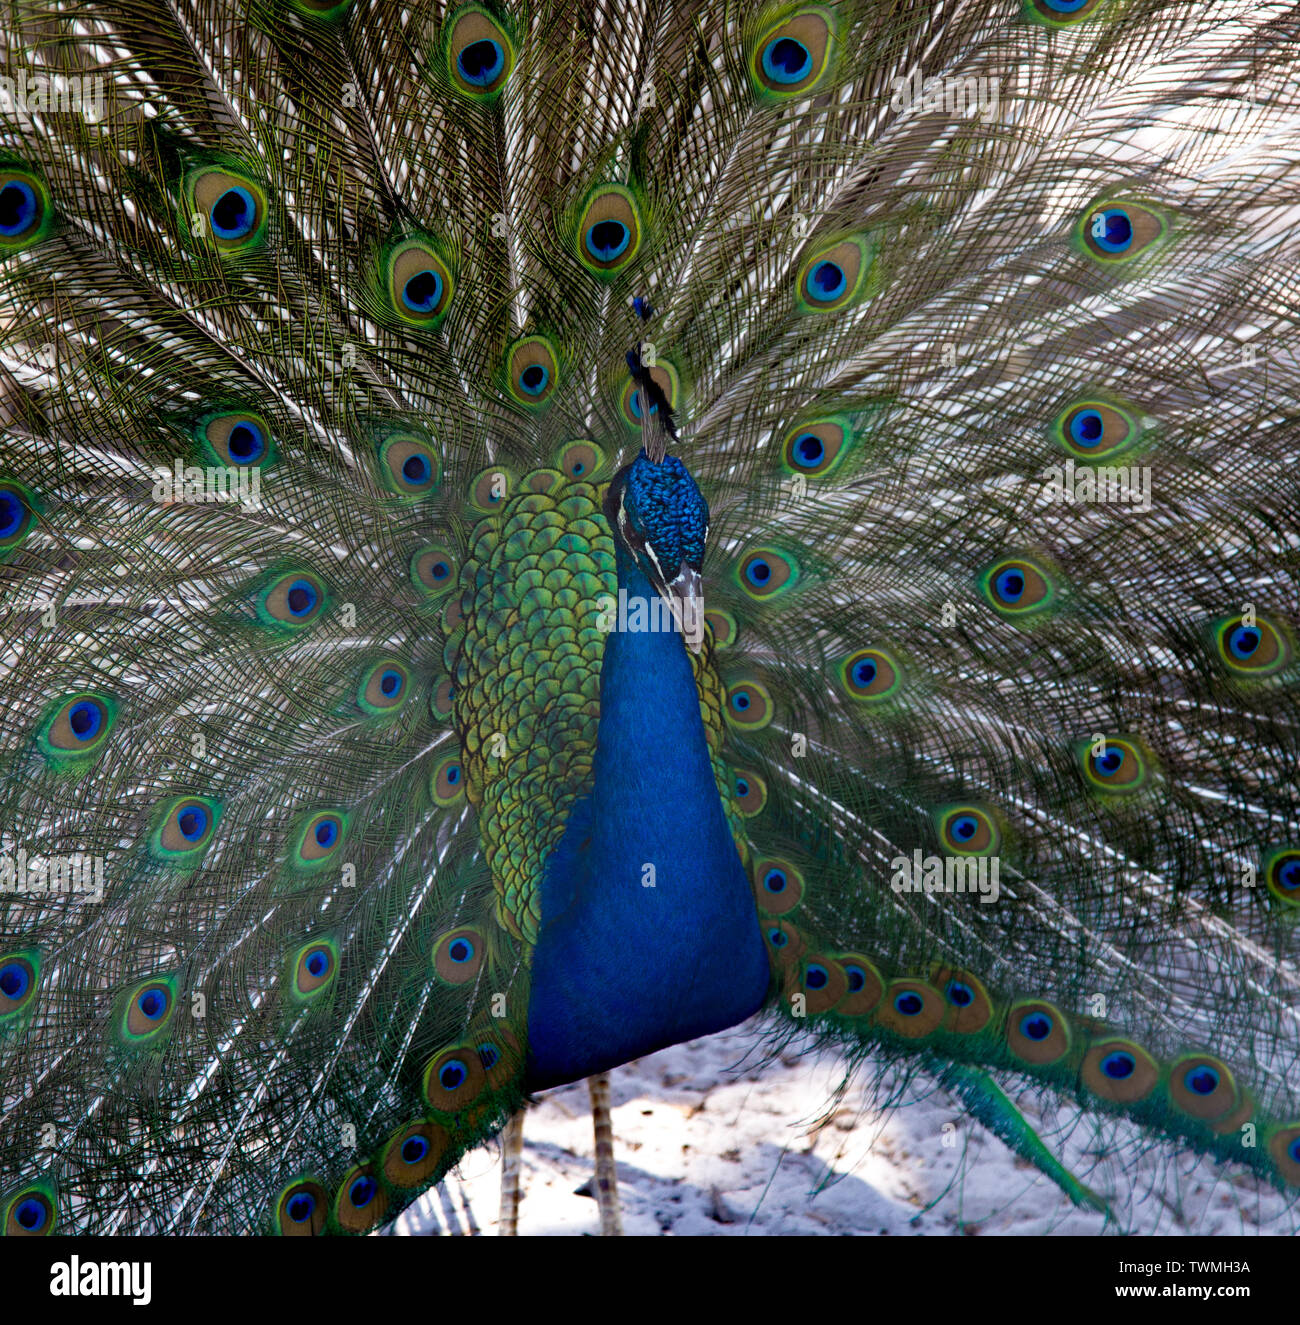 A peacock displays his colorful plumage Stock Photo - Alamy